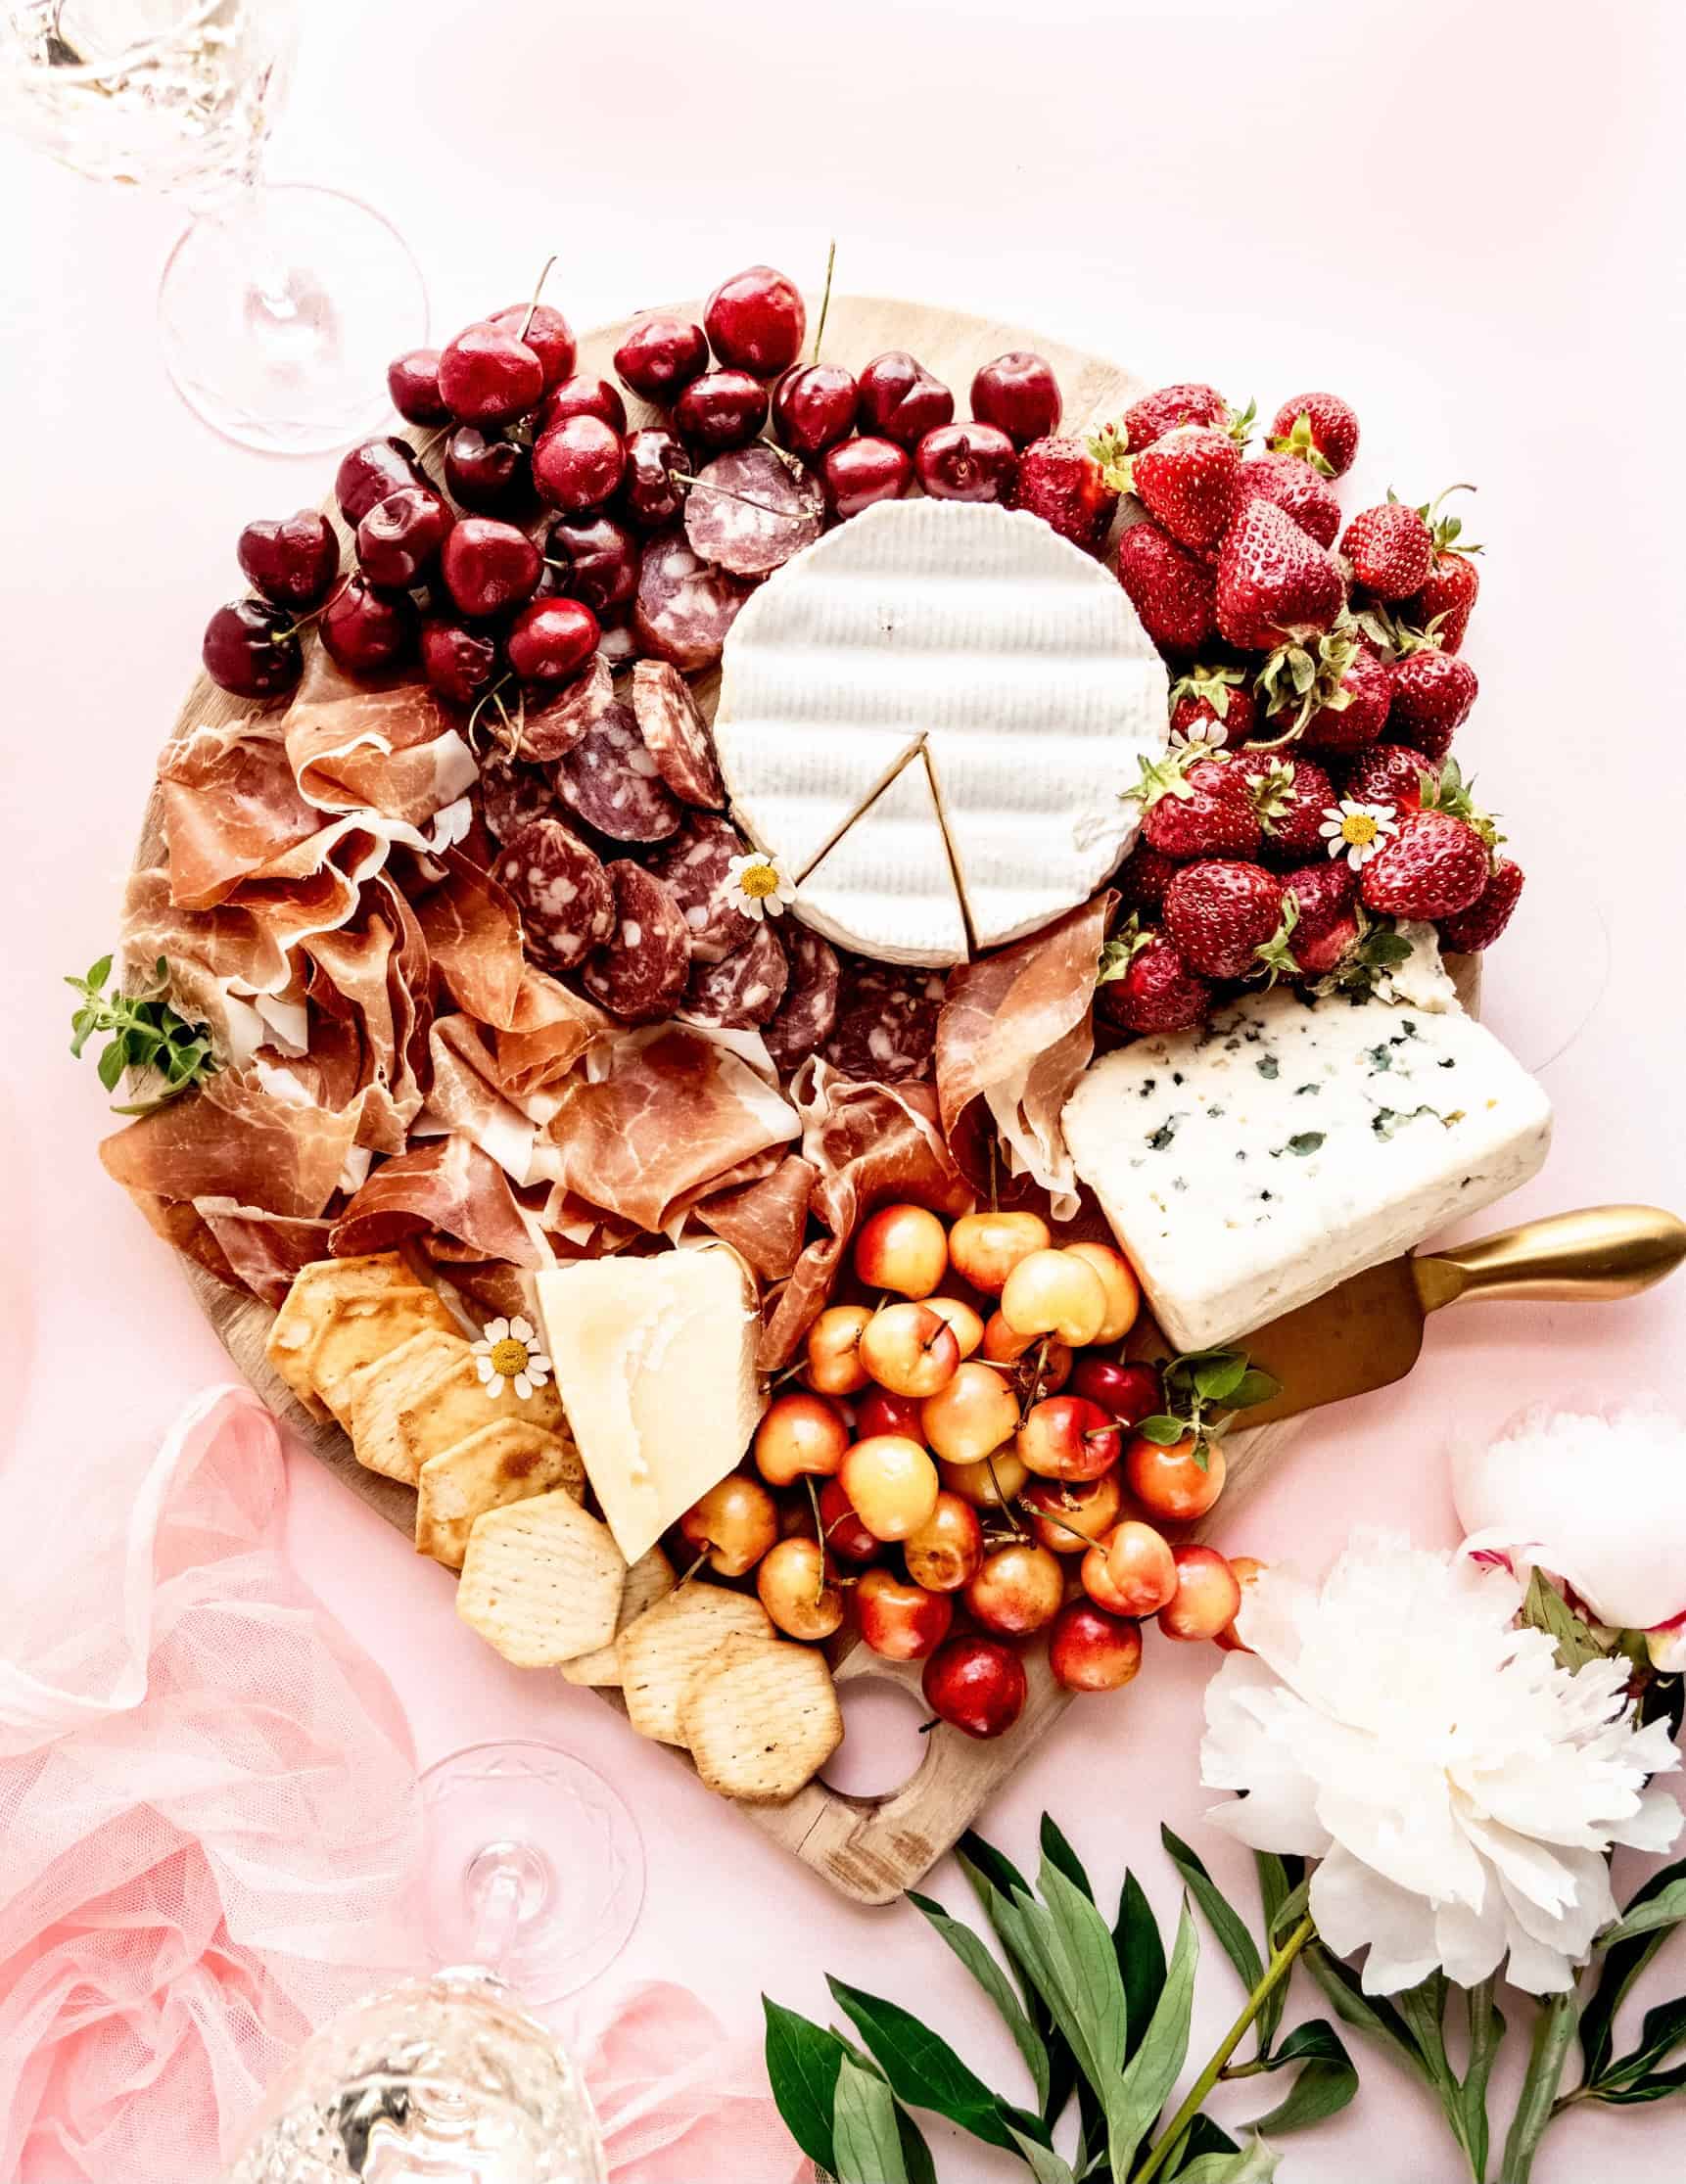 How to Create the Perfect Summer Charcuterie Board - Pink Owl Kitchen